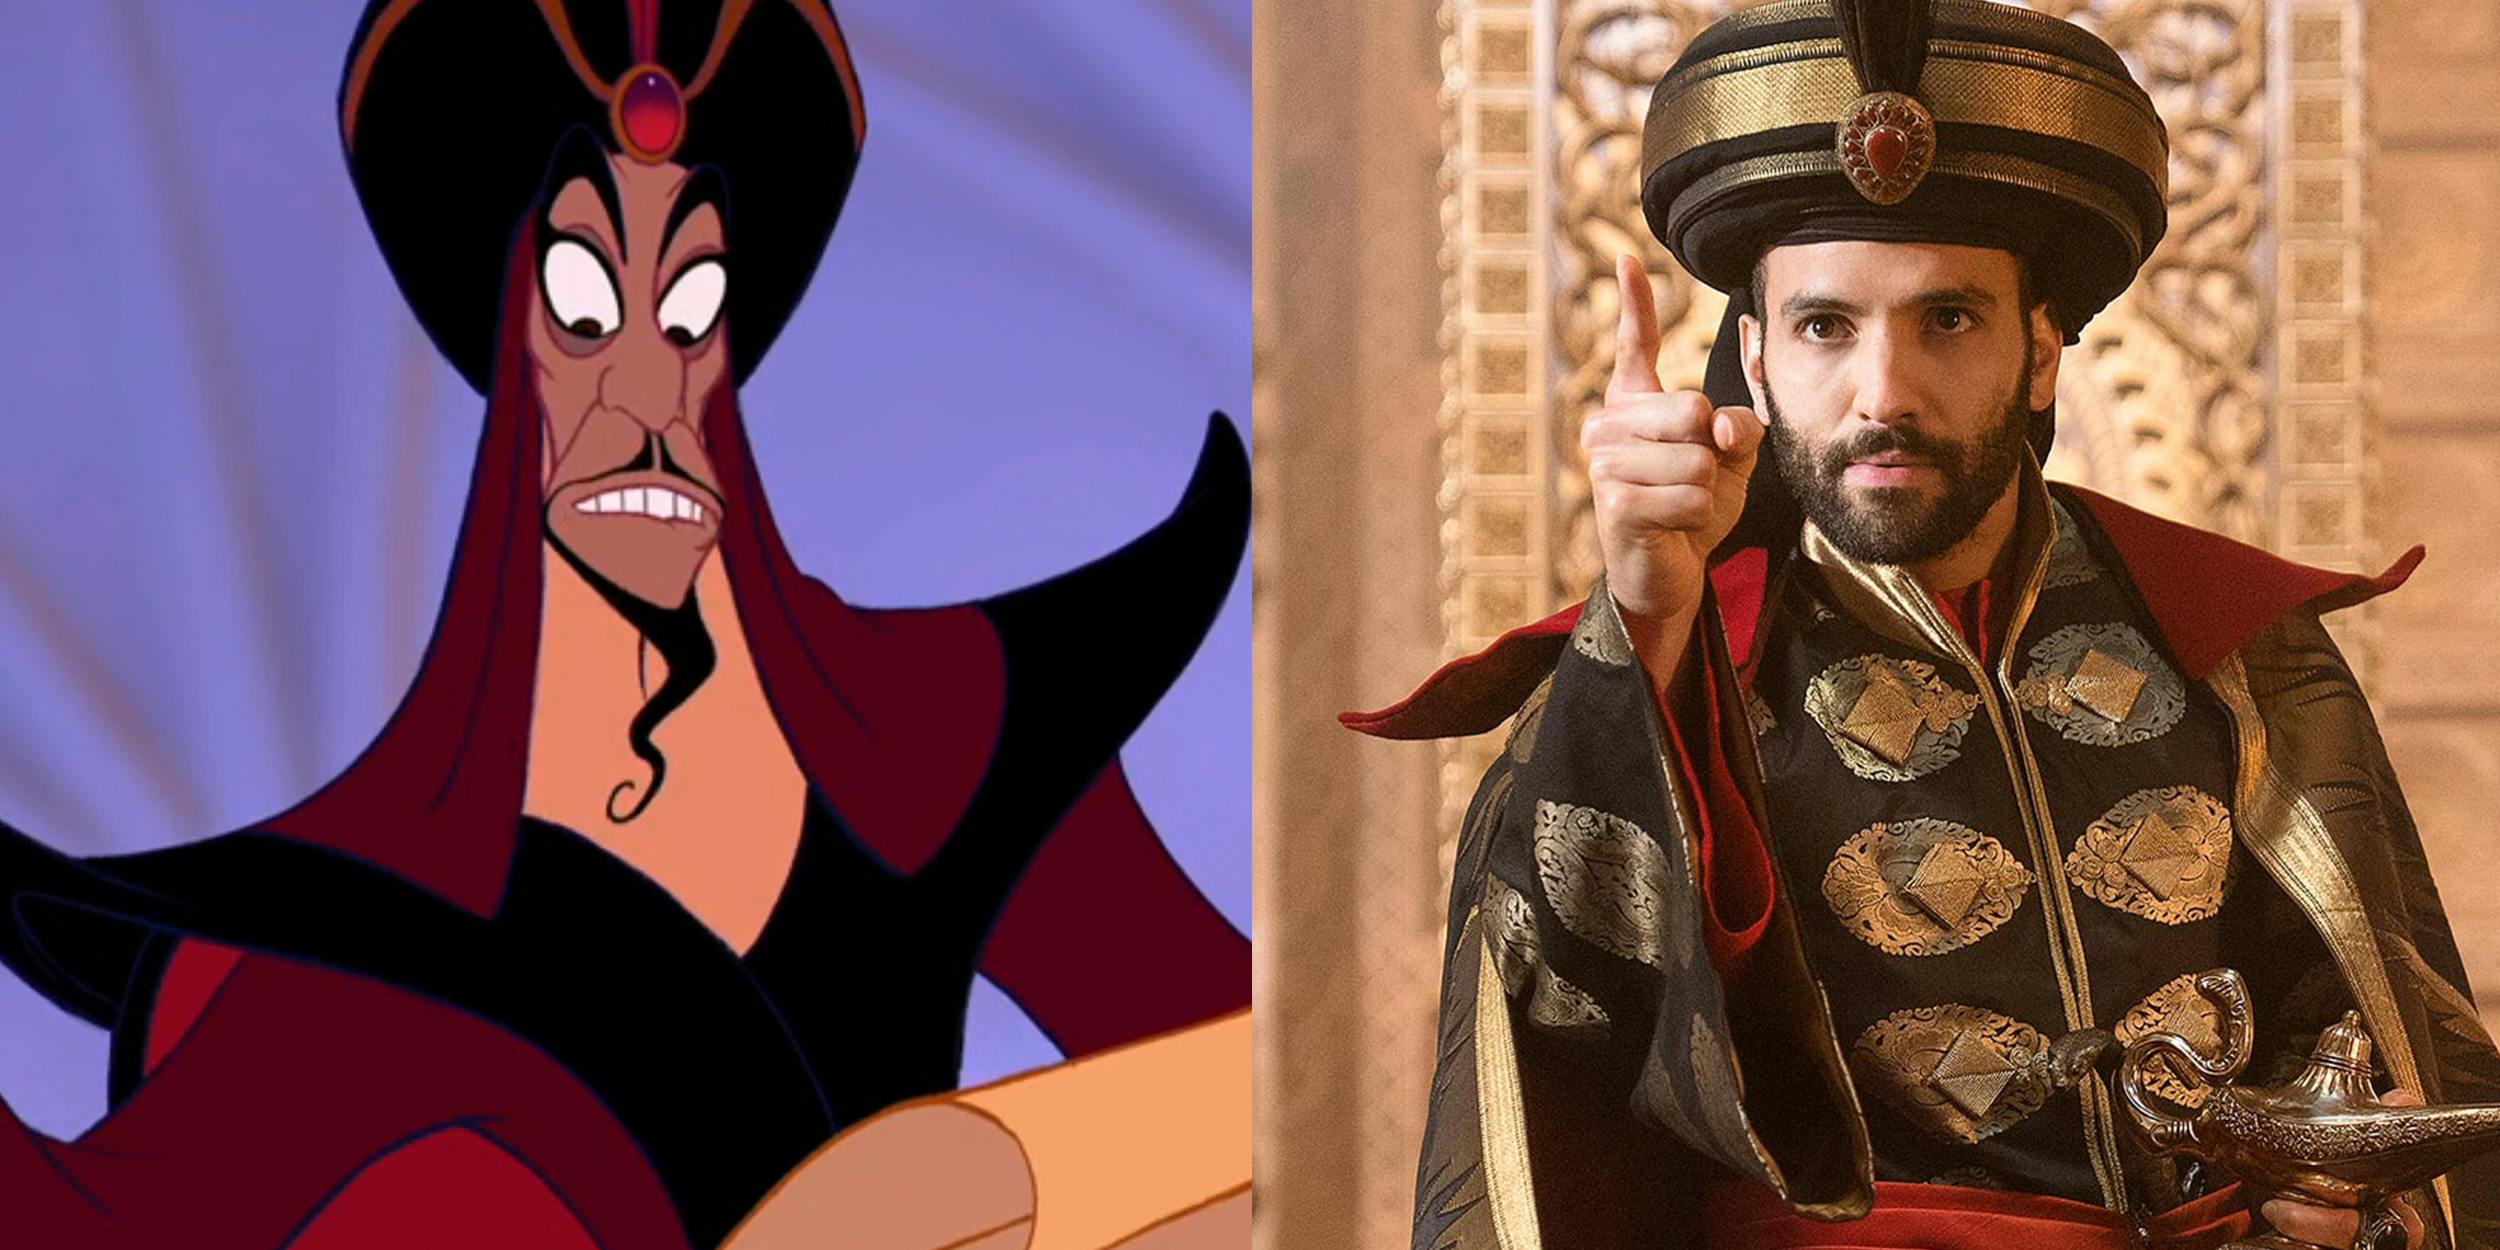 Jafar In the New 'Aladdin' Film Is Hot. And It's Confusing People